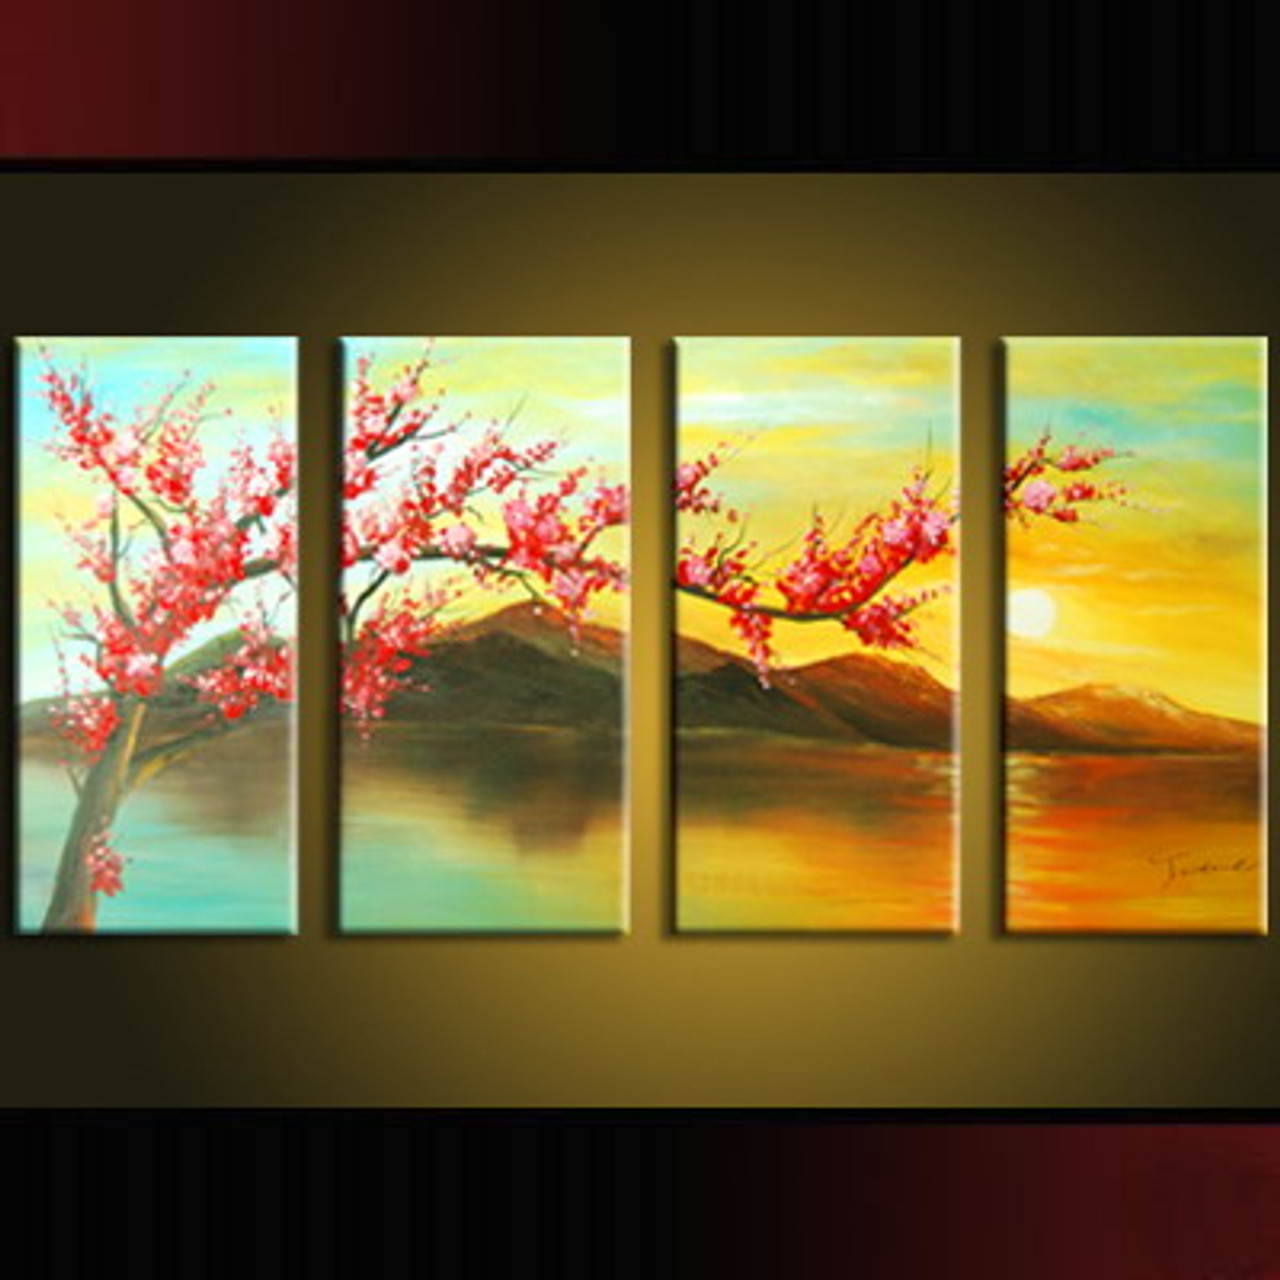 Buy New Beginning by Community Artists Group@ Rs. 5590. Code ...